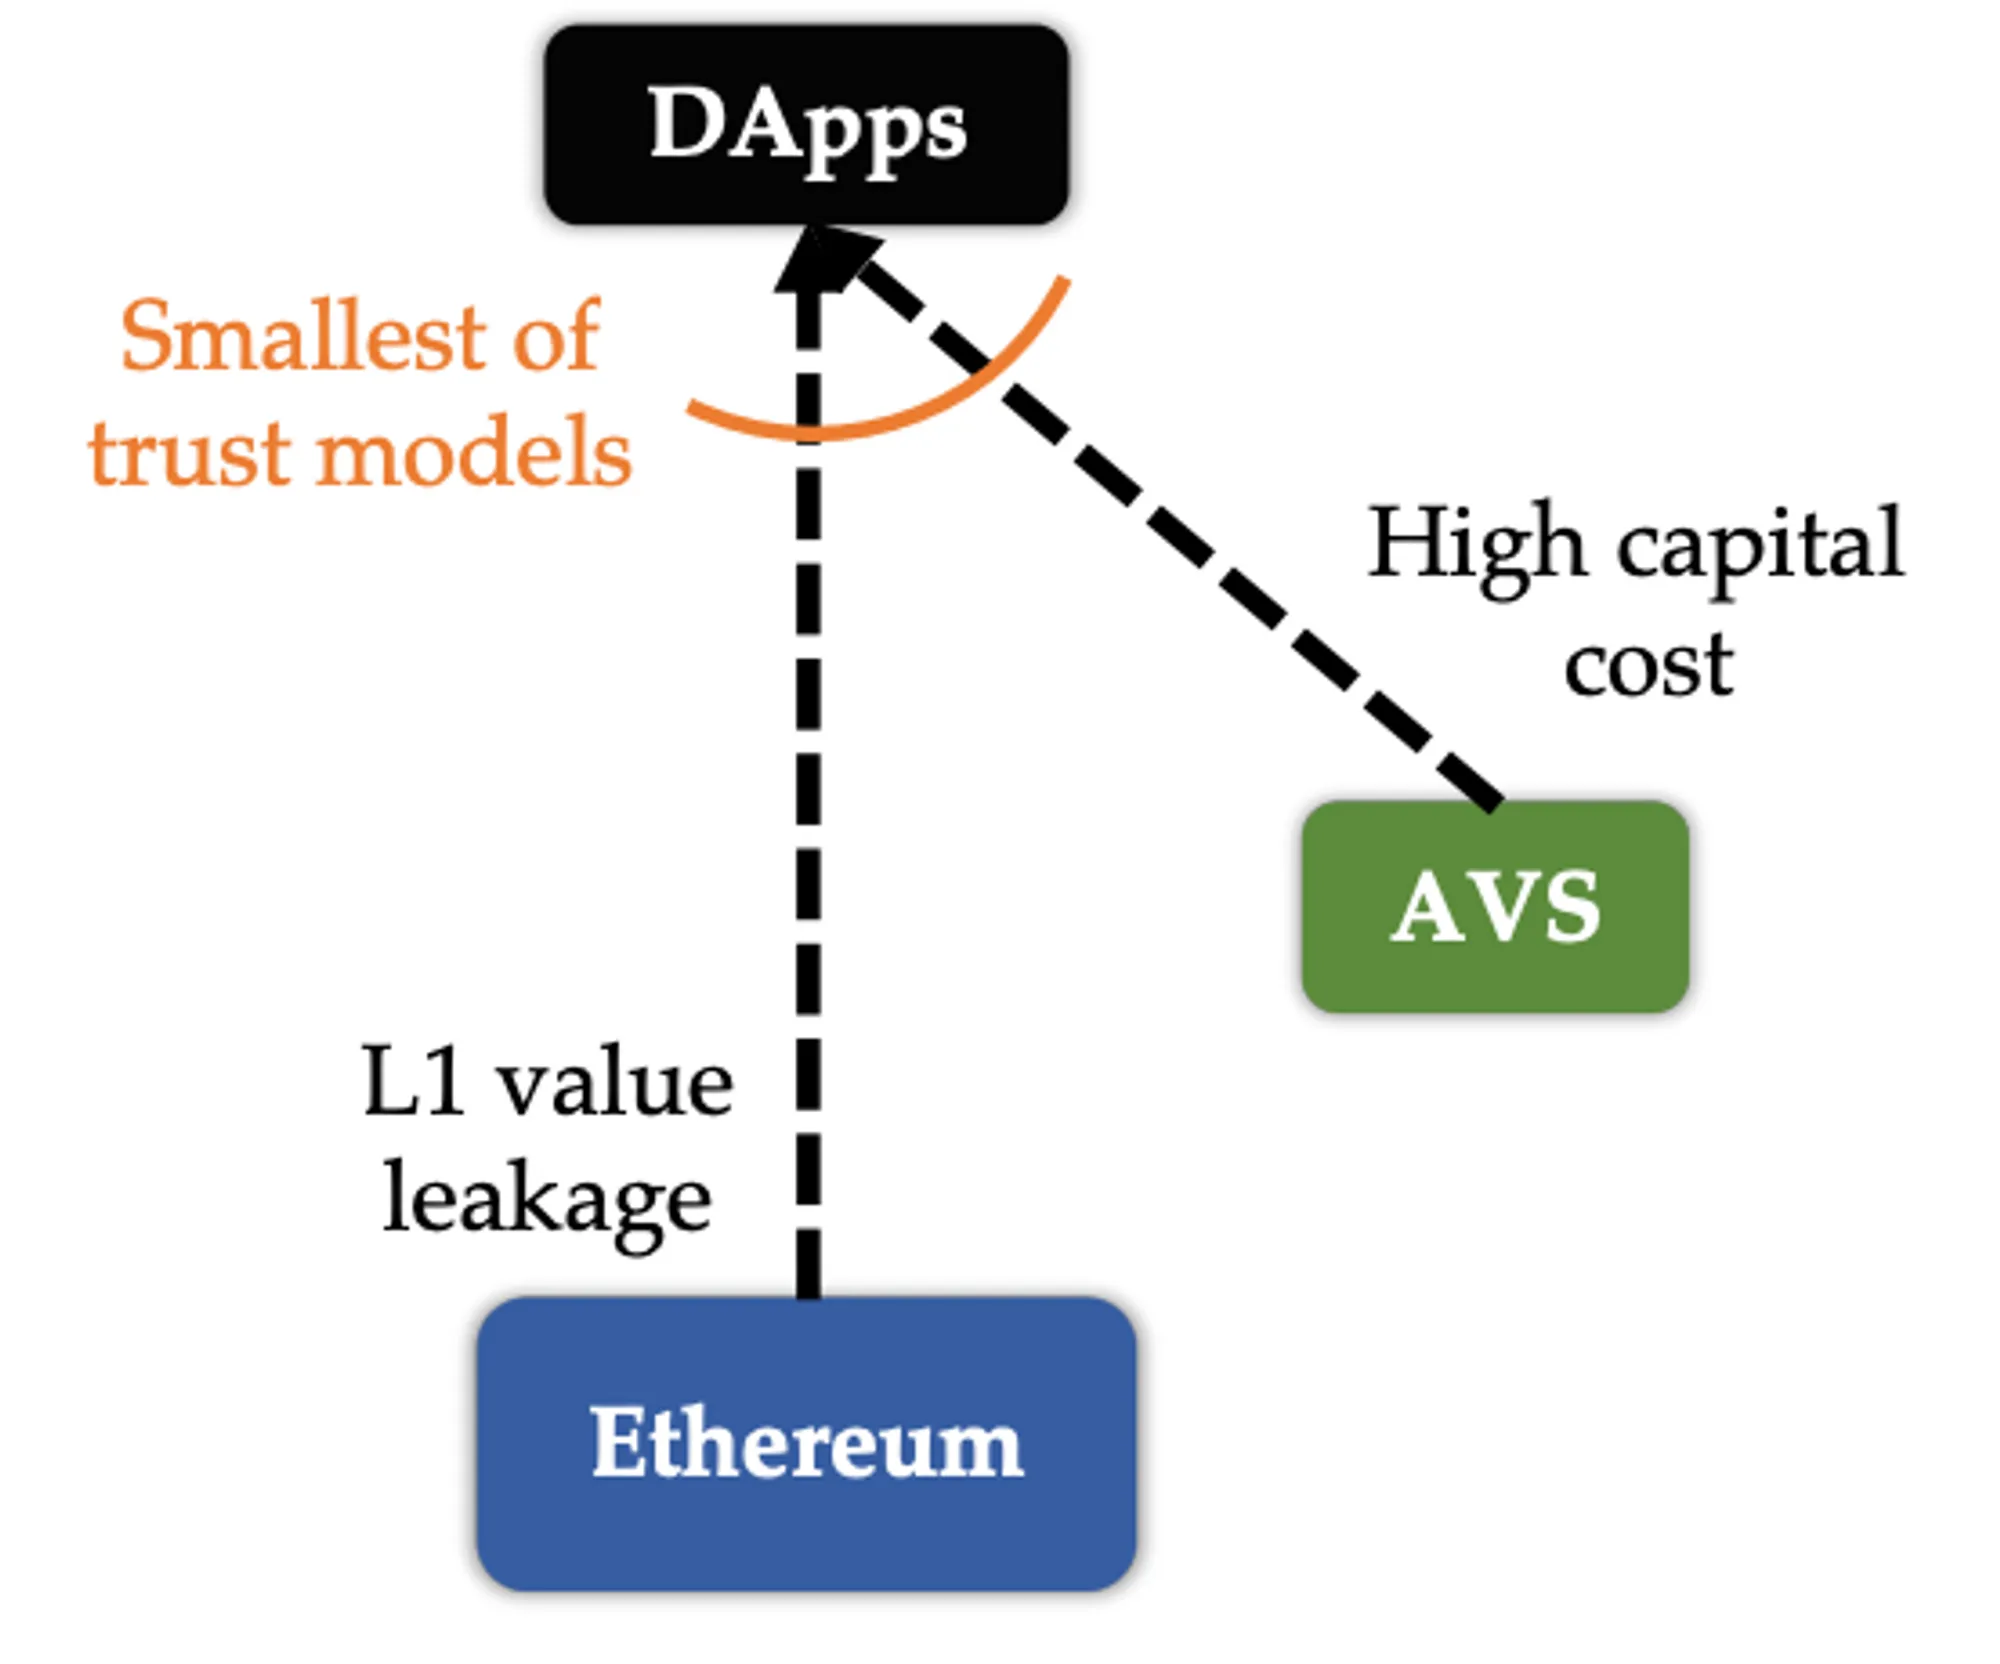 he bottleneck of system security often exists in the most vulnerable parts, and as a result, AVS is more likely to become the target of attacks. (https://docs.eigenlayer.xyz/whitepaper.pdf)